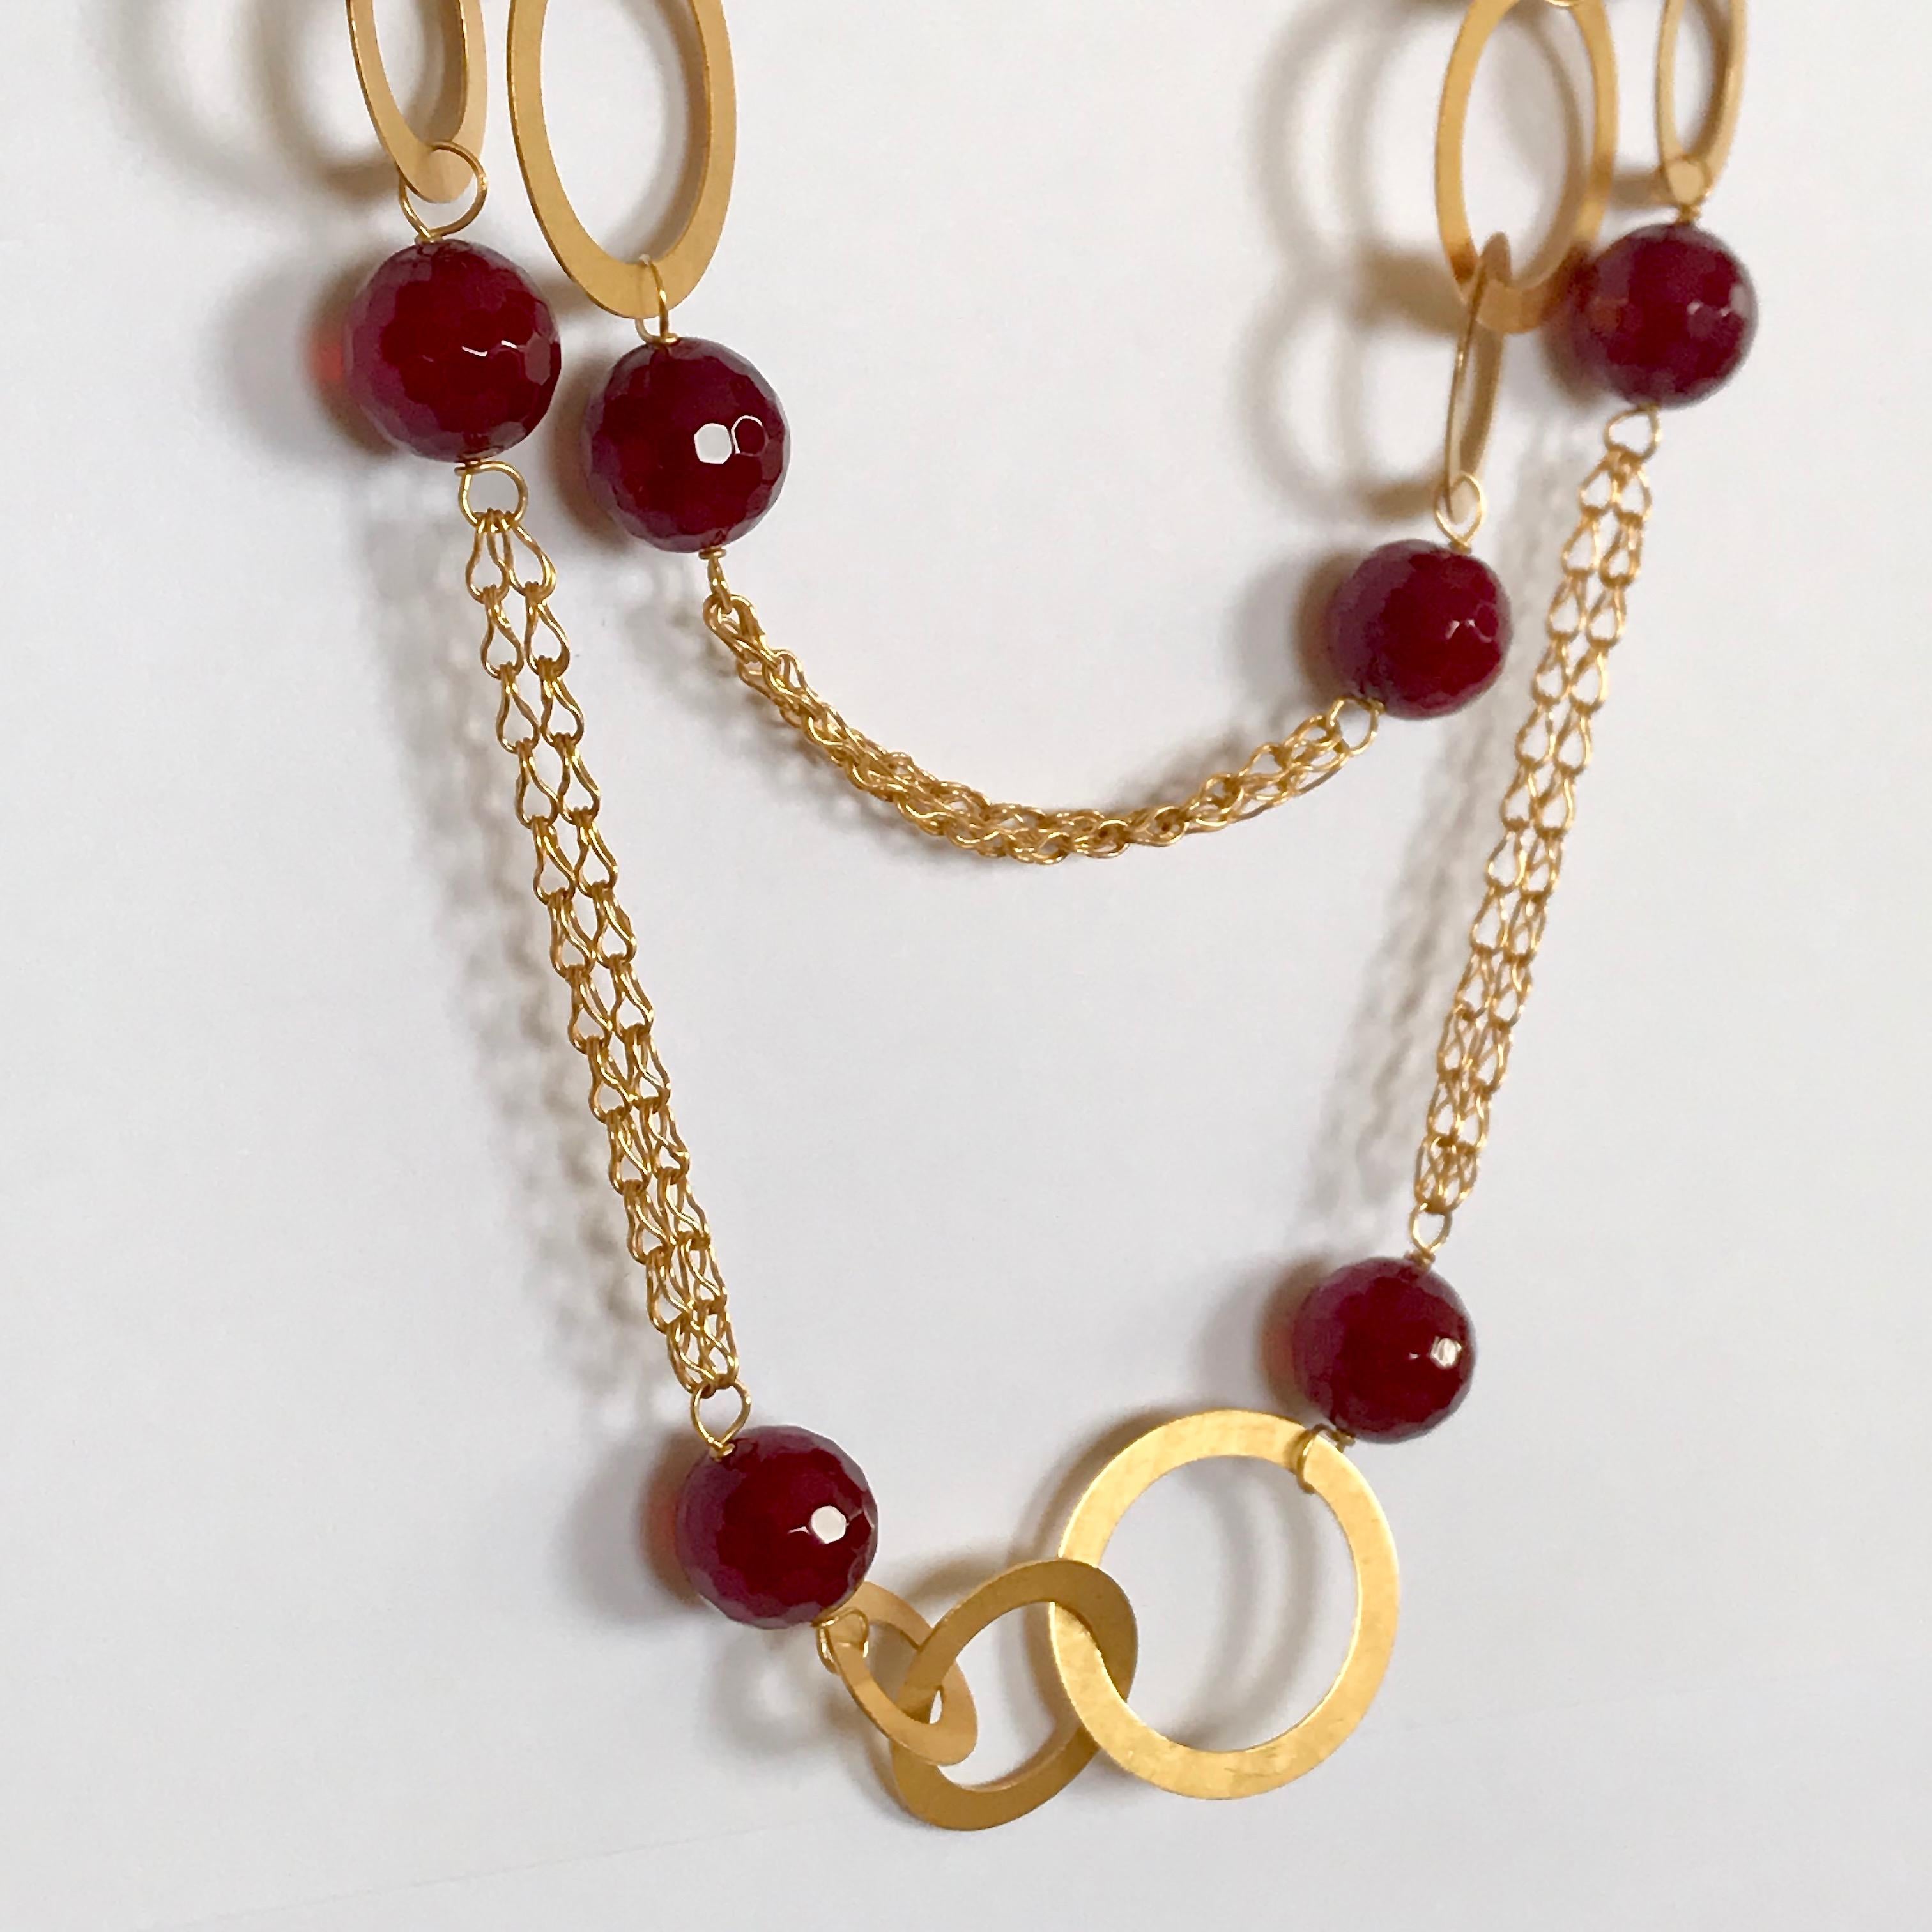 18 Karat Solid Yellow Gold Handmade Cranberry Agate Chain Necklace For Sale 4